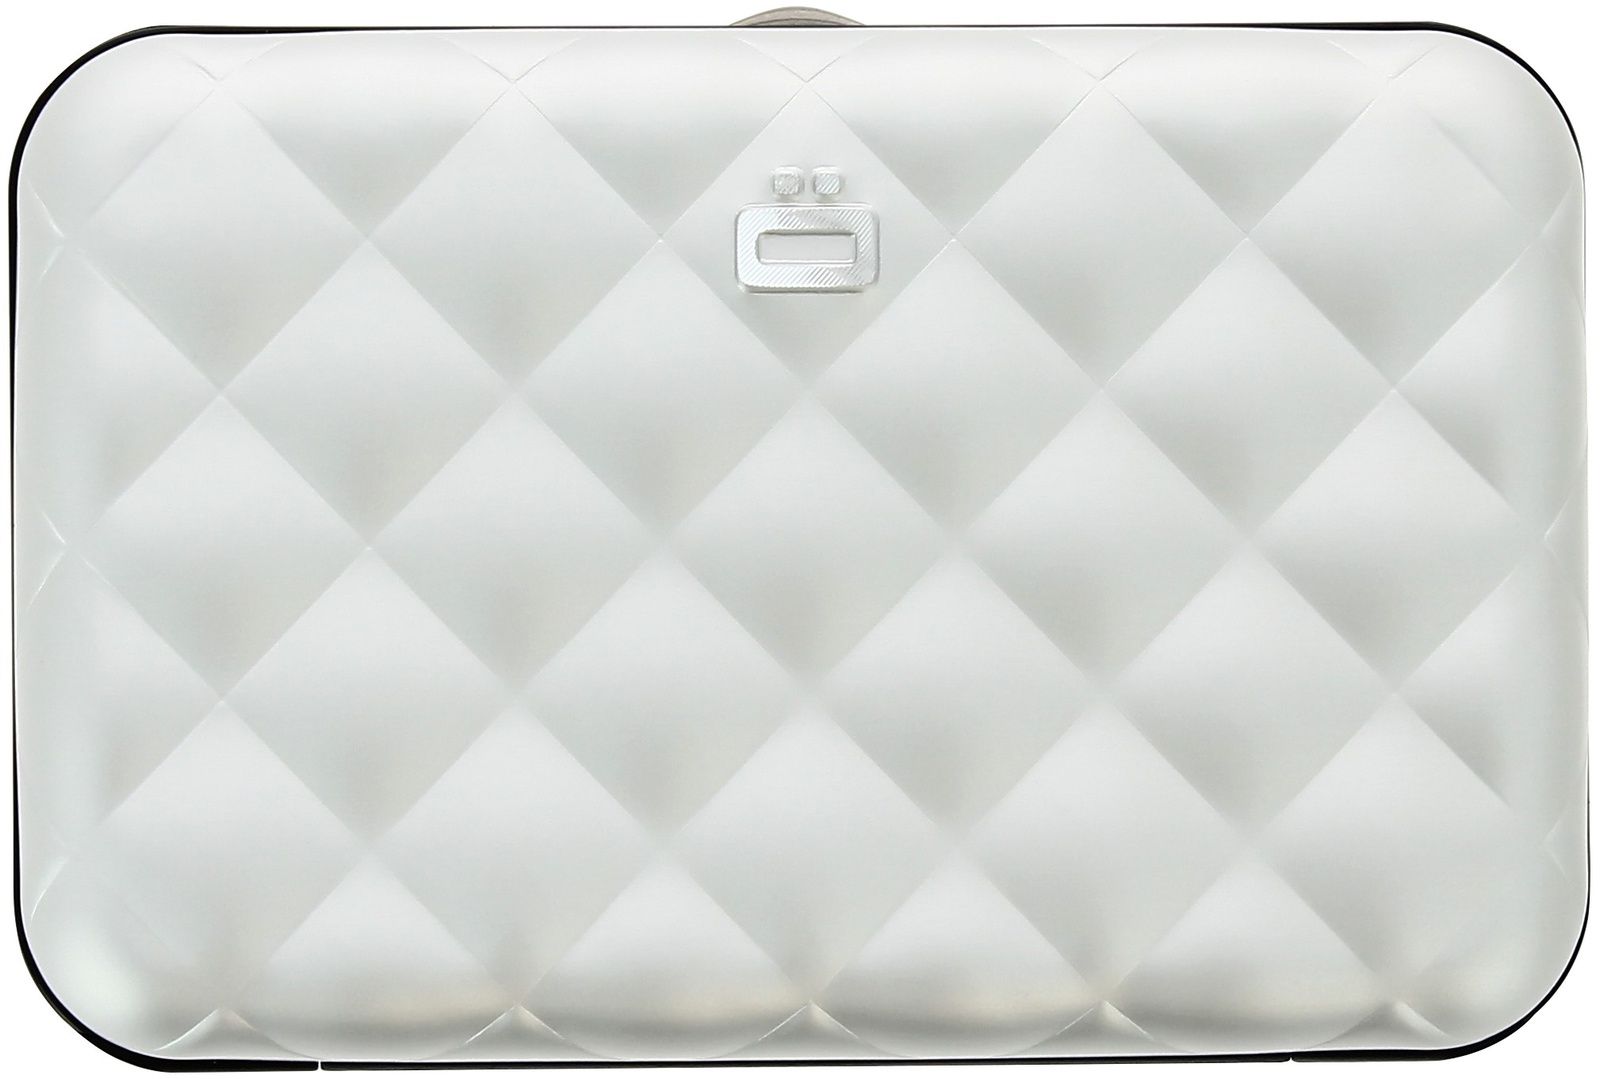  OGON Quilted Button RFID Safe, 201290, 